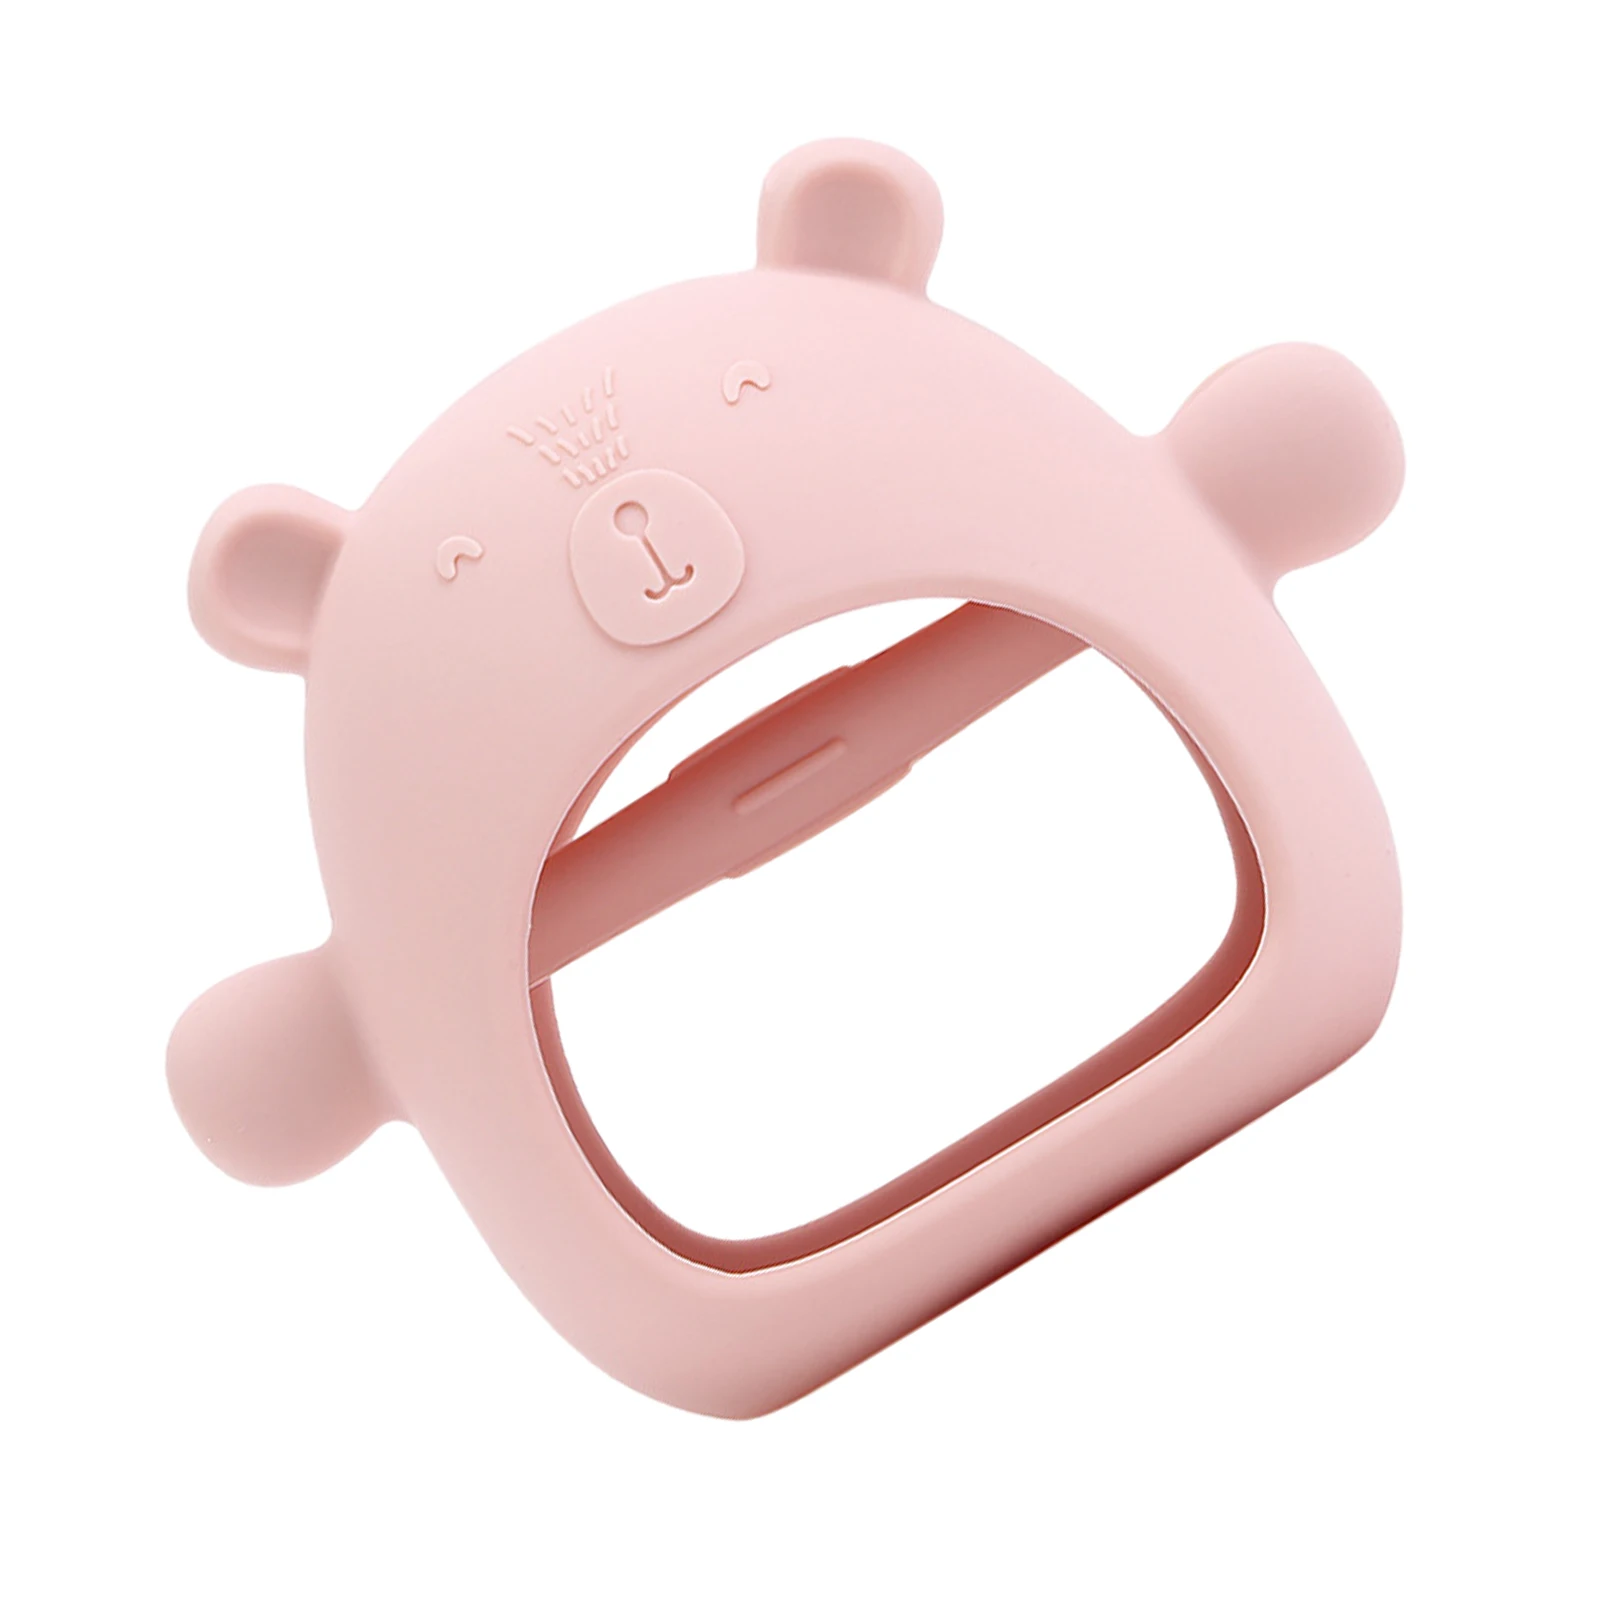 

Bear Silicone Teether Never Drop Baby Chew Toys For Sucking Biting Needs Teething Toy Soothing Pacifiers For 0-6month Infants Bo